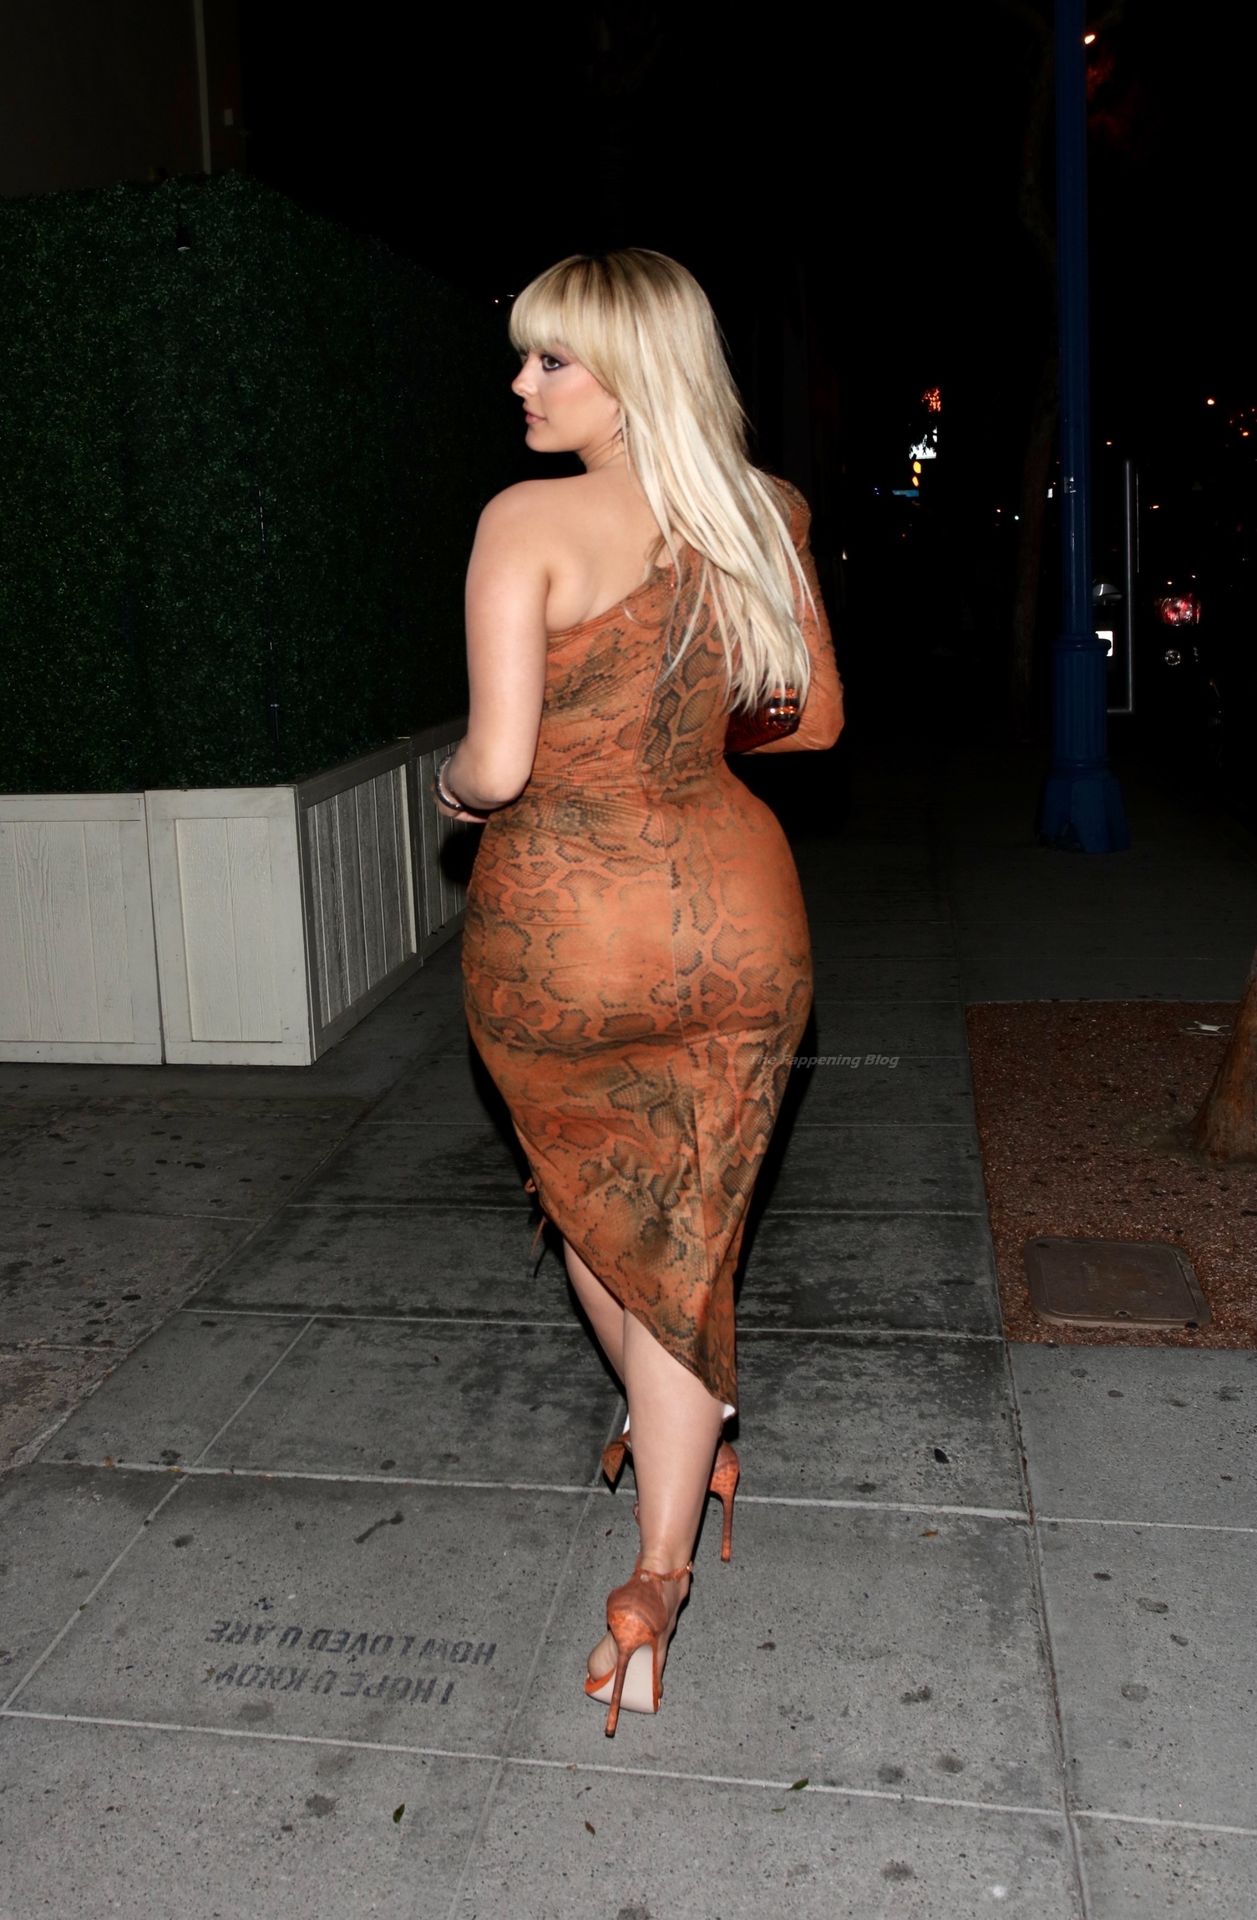 Bebe Rexha Flaunts Her Assets in West Hollywood (52 Photos)